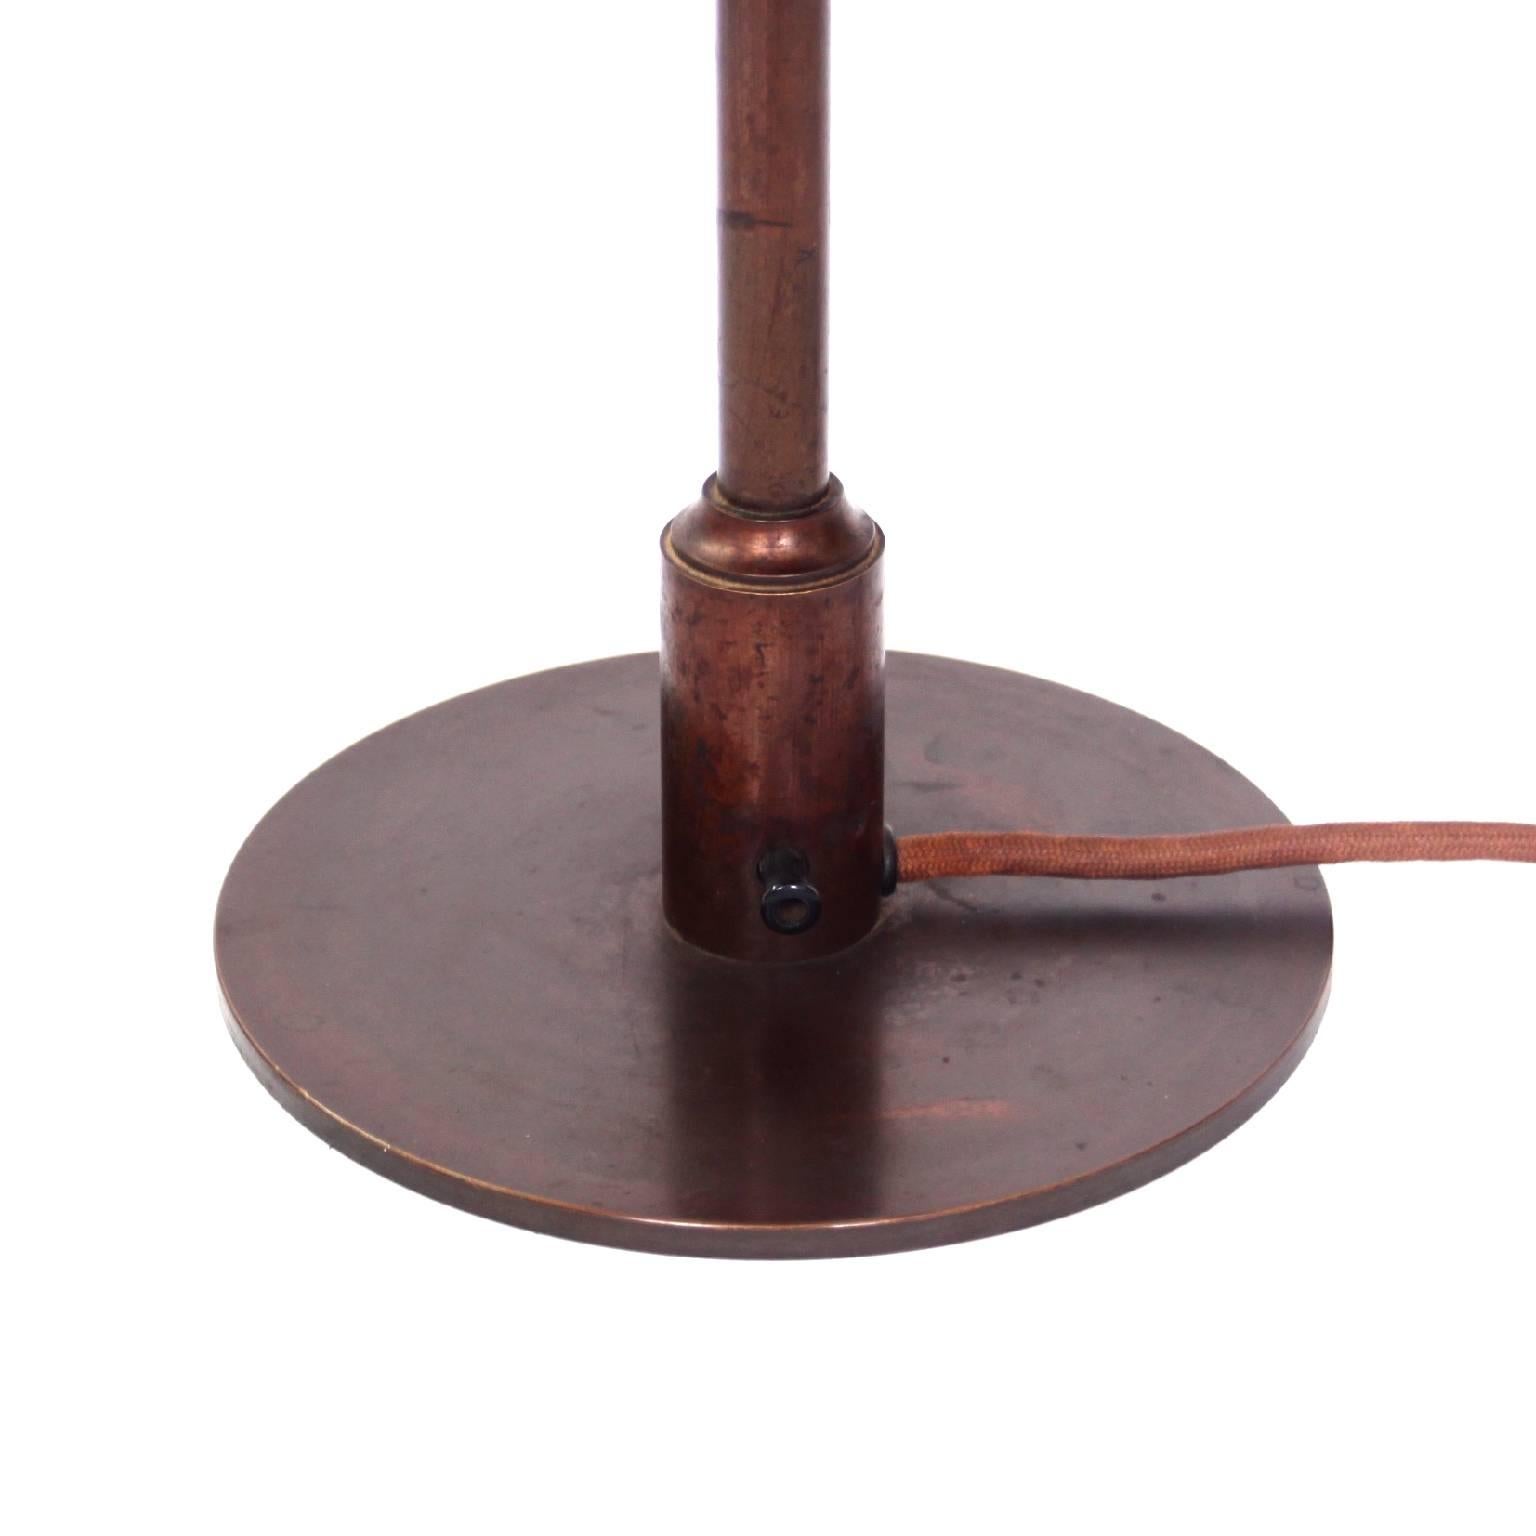 Poul Henningsen & Louis Poulsen, Mid-century Modern design

This is the iconic Poul Henningsen (PH 4/3) table lamp with original copper shades.

Stand, switch and socket house of browned brass. 

Designed 1927 and manufactured by Louis Poulsen,